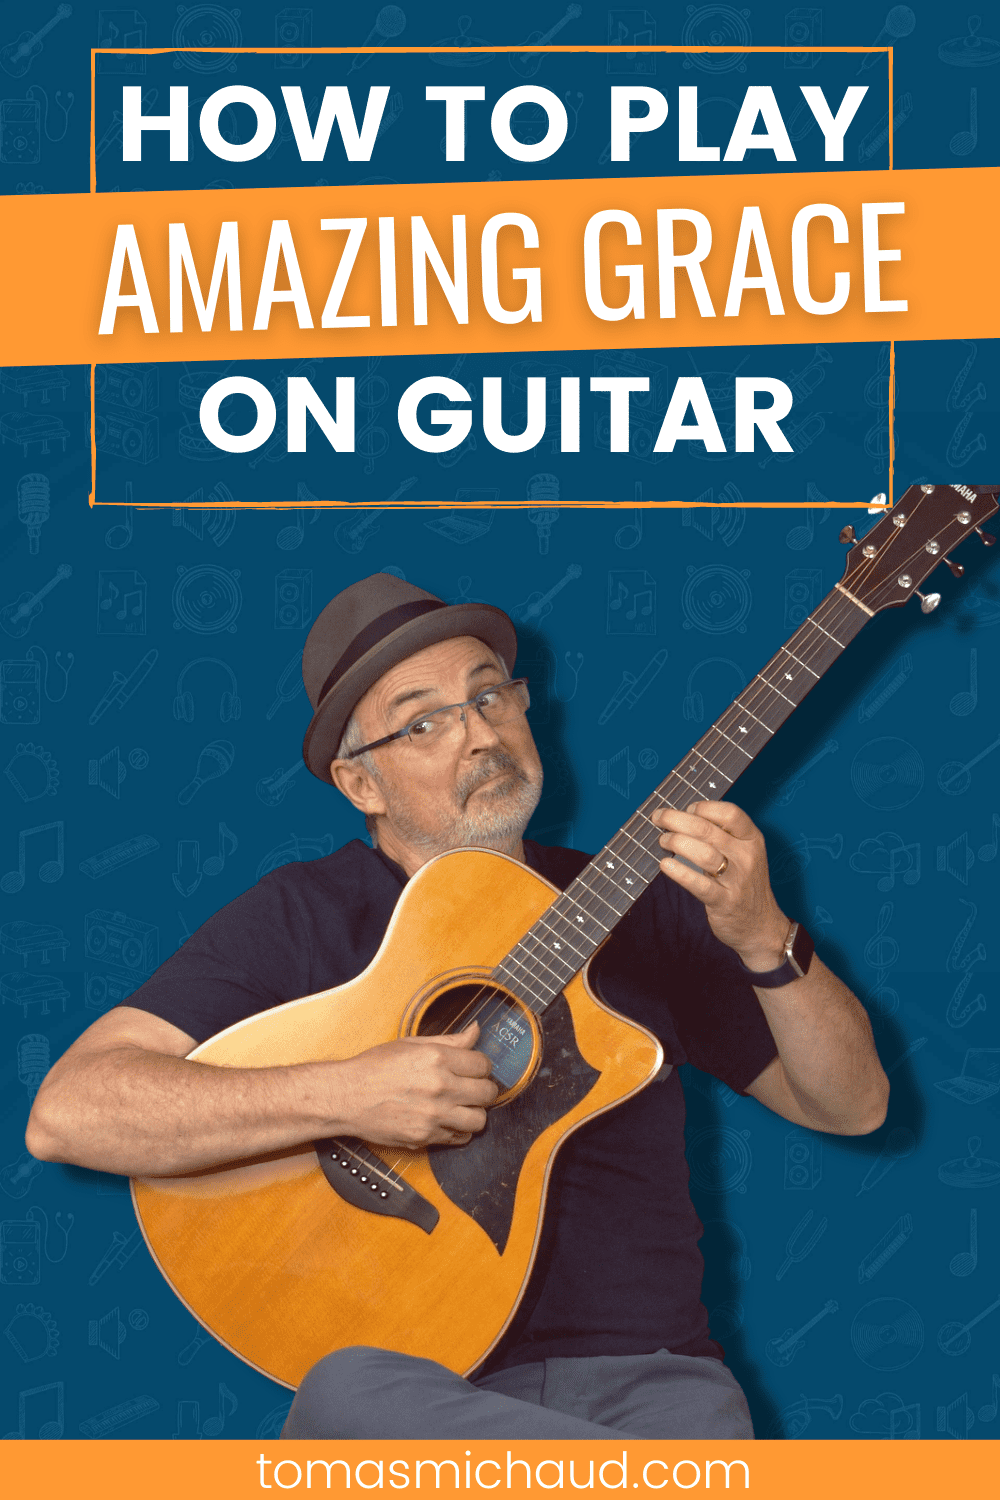 How To Play Amazing Grace on Guitar